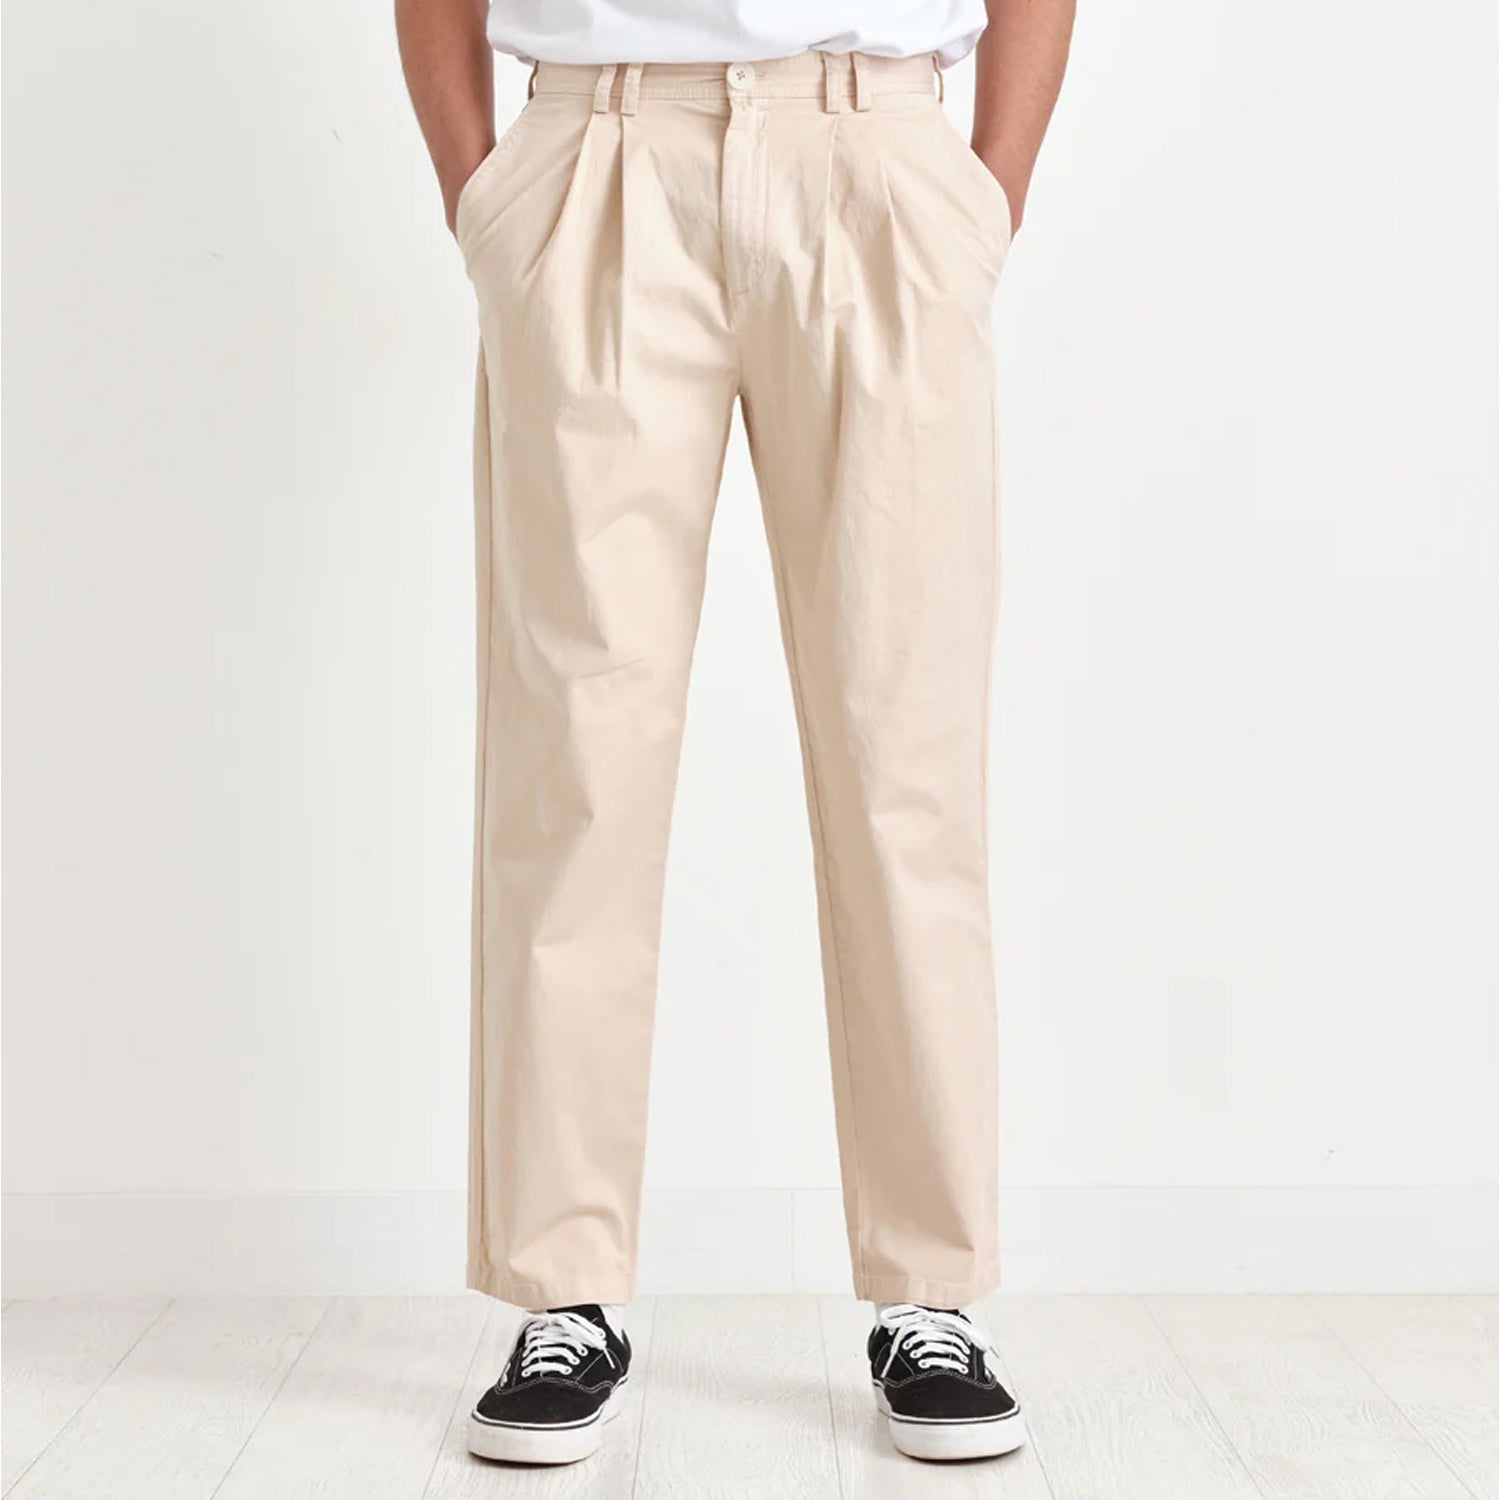 Pleat Trousers - Cotton Twill SAND
These Pleat Trousers are designed with a straight leg and are the perfect middle ground between tailored and relaxed dressing. They will elevate your everyday WAX LONDON